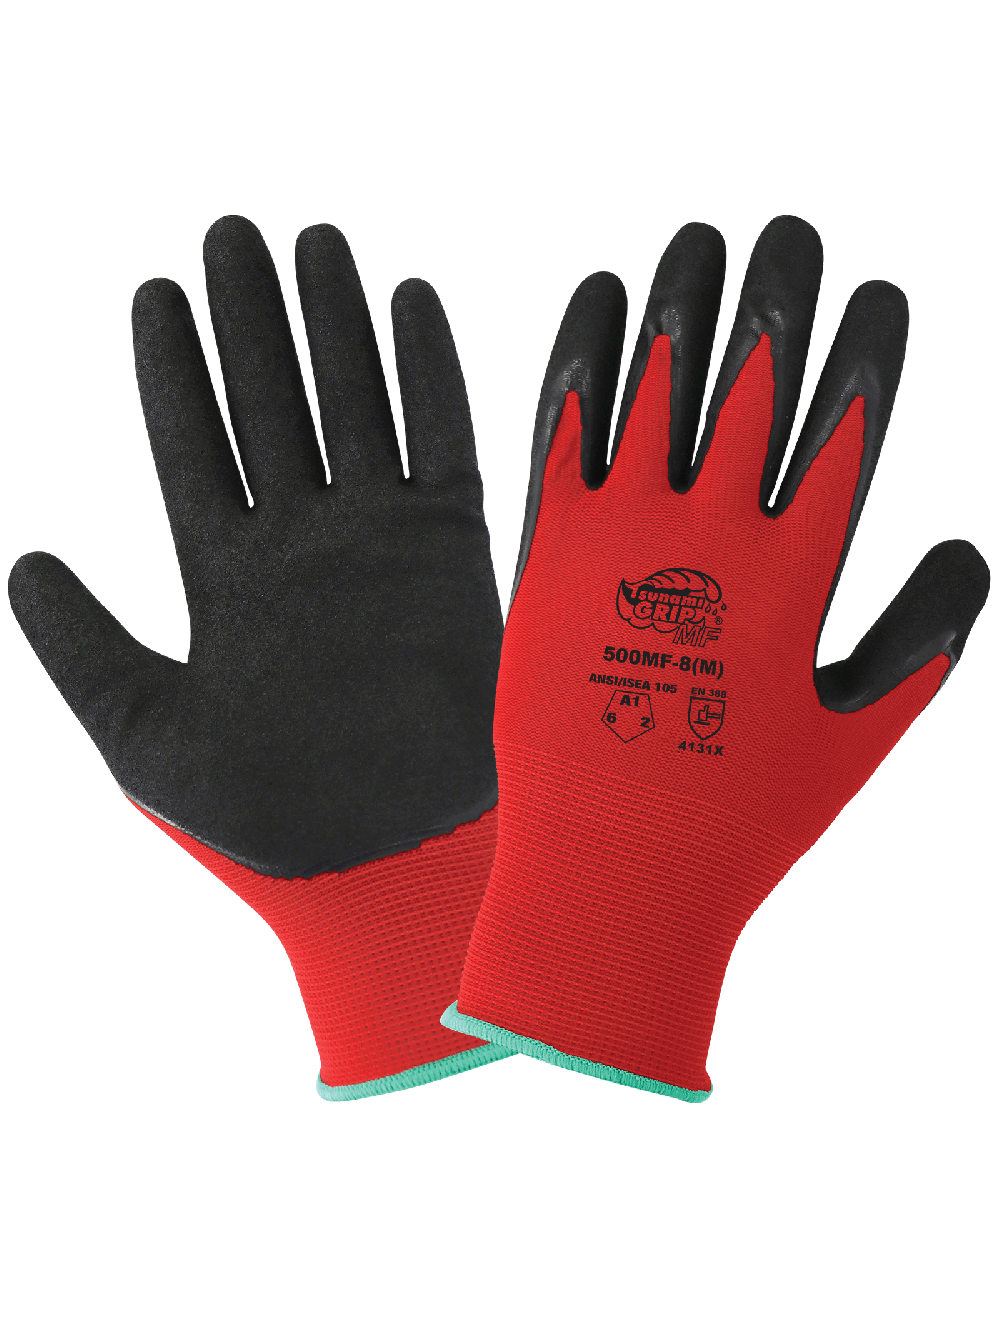 Firm Grip Gloves Touch Screen General Purpose Hard Working XL 1